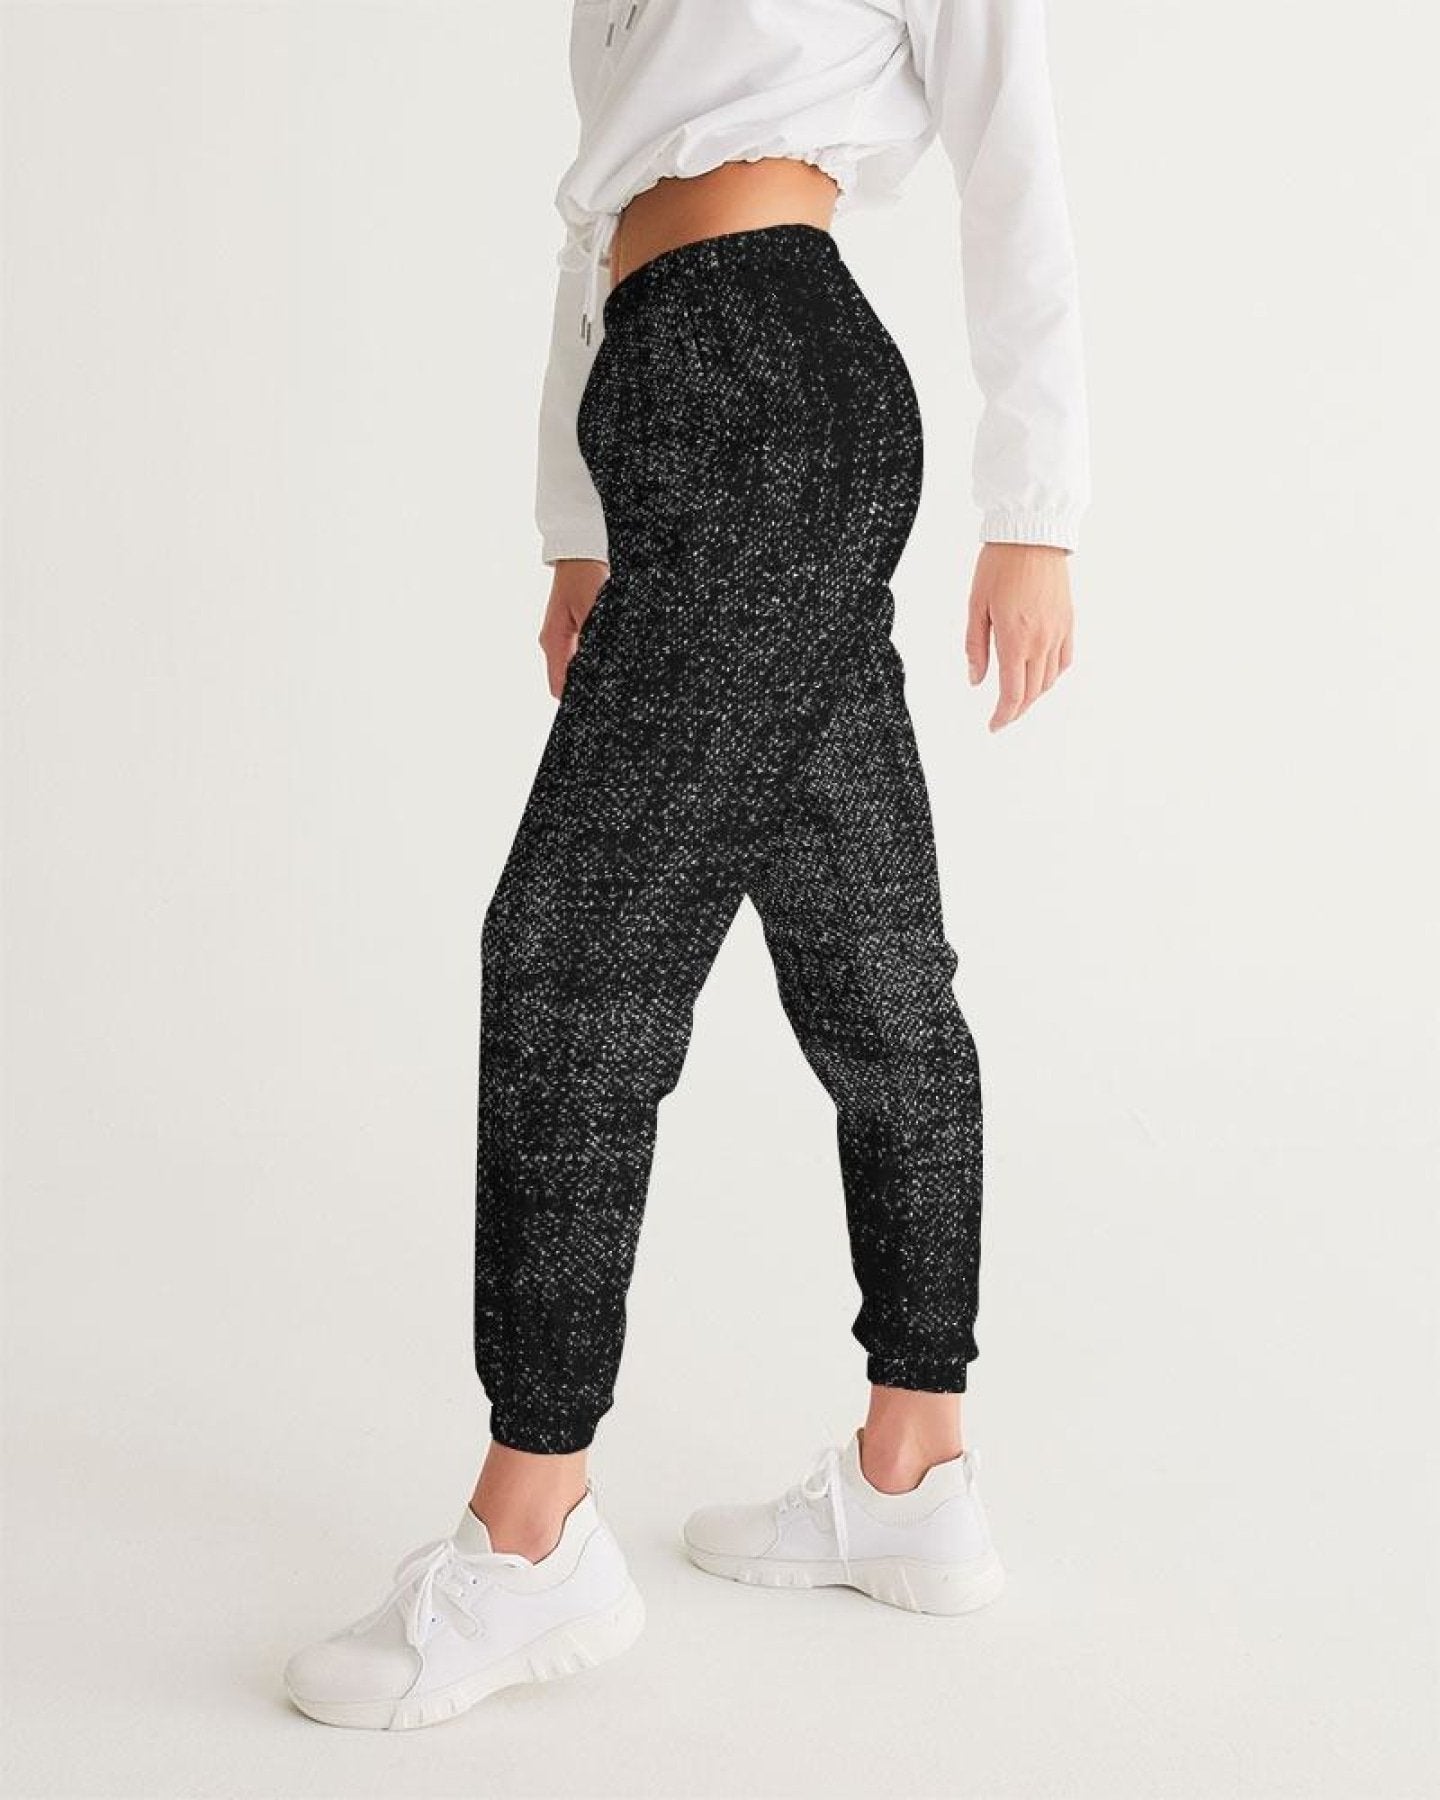 Zip Pockets Track Pants' - Track pants equipped with zippered pockets, offering secure storage and a stylish touch for your athletic or casual outfits.